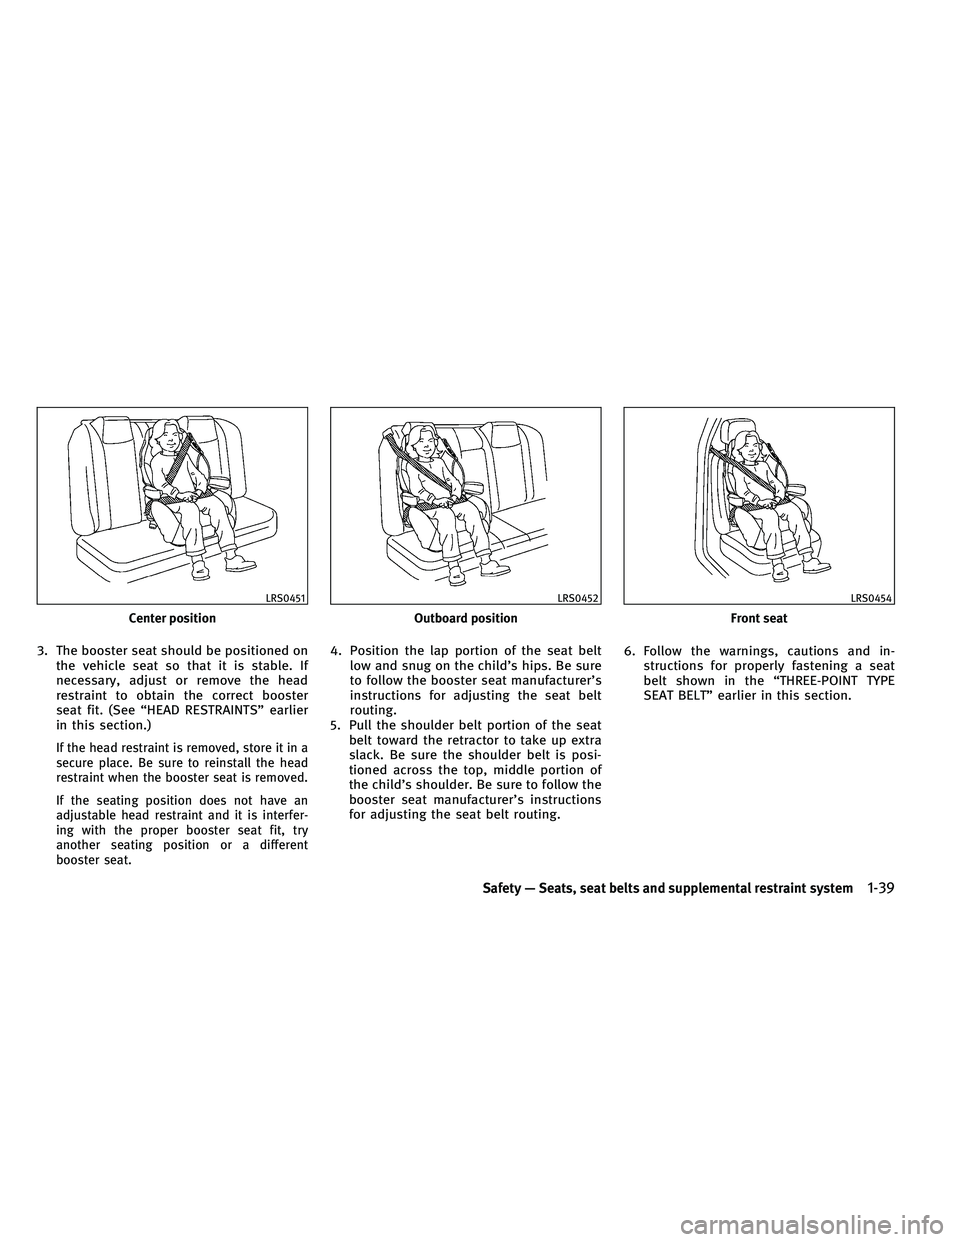 INFINITI G 2011  Owners Manual 3. The booster seat should be positioned onthe vehicle seat so that it is stable. If
necessary, adjust or remove the head
restraint to obtain the correct booster
seat fit. (See “HEAD RESTRAINTS” e